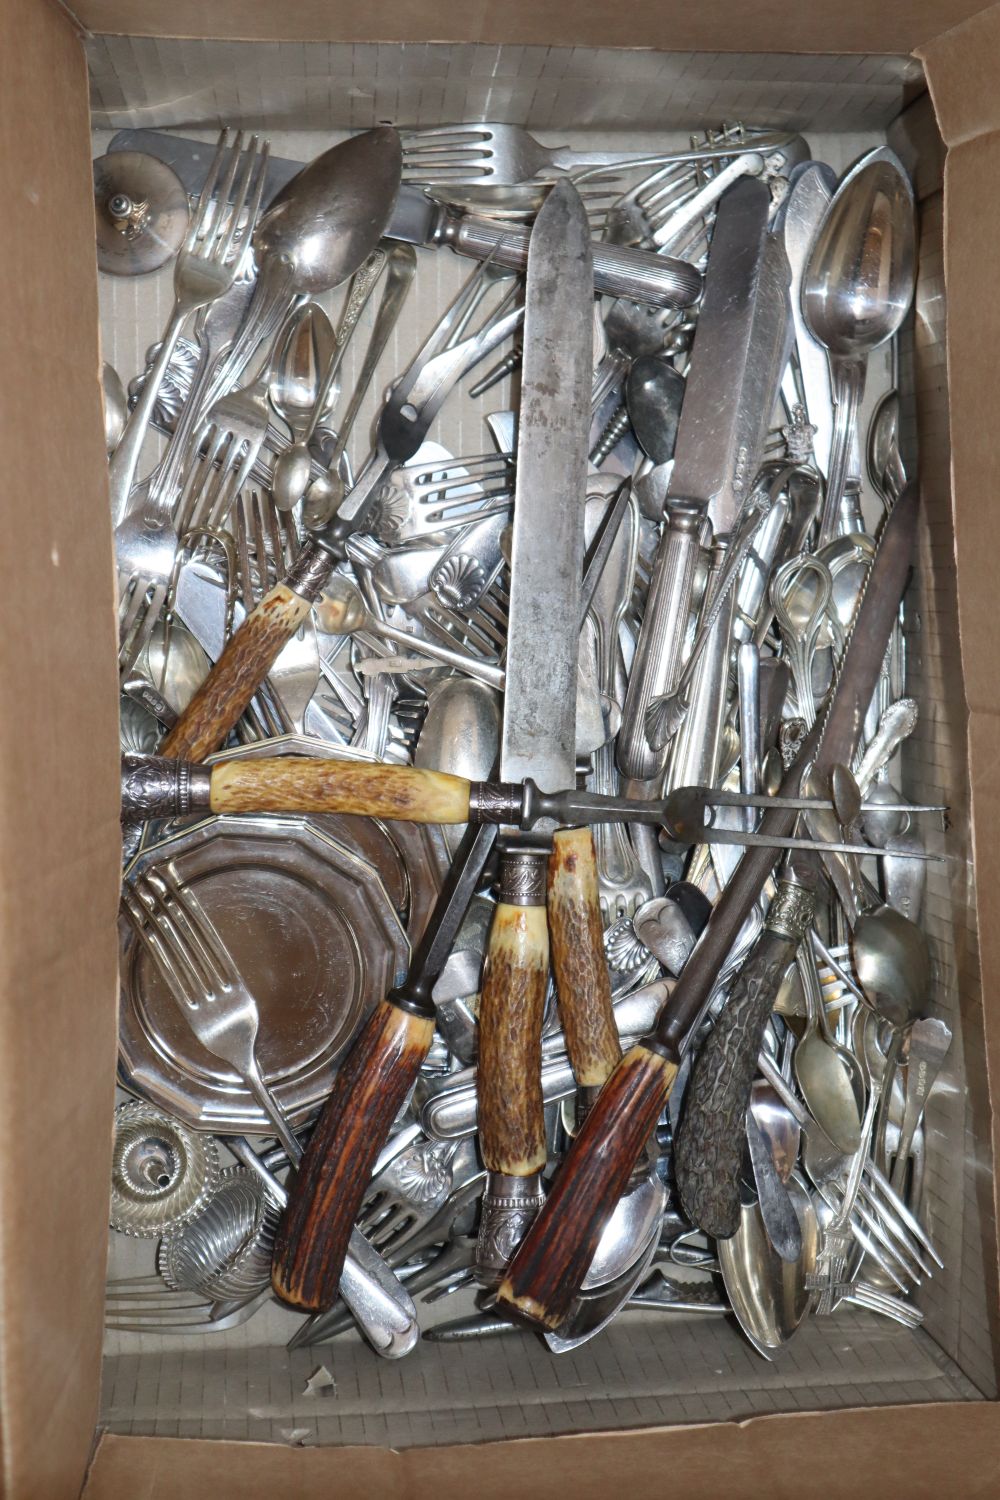 A quantity of silver plate and cutlery